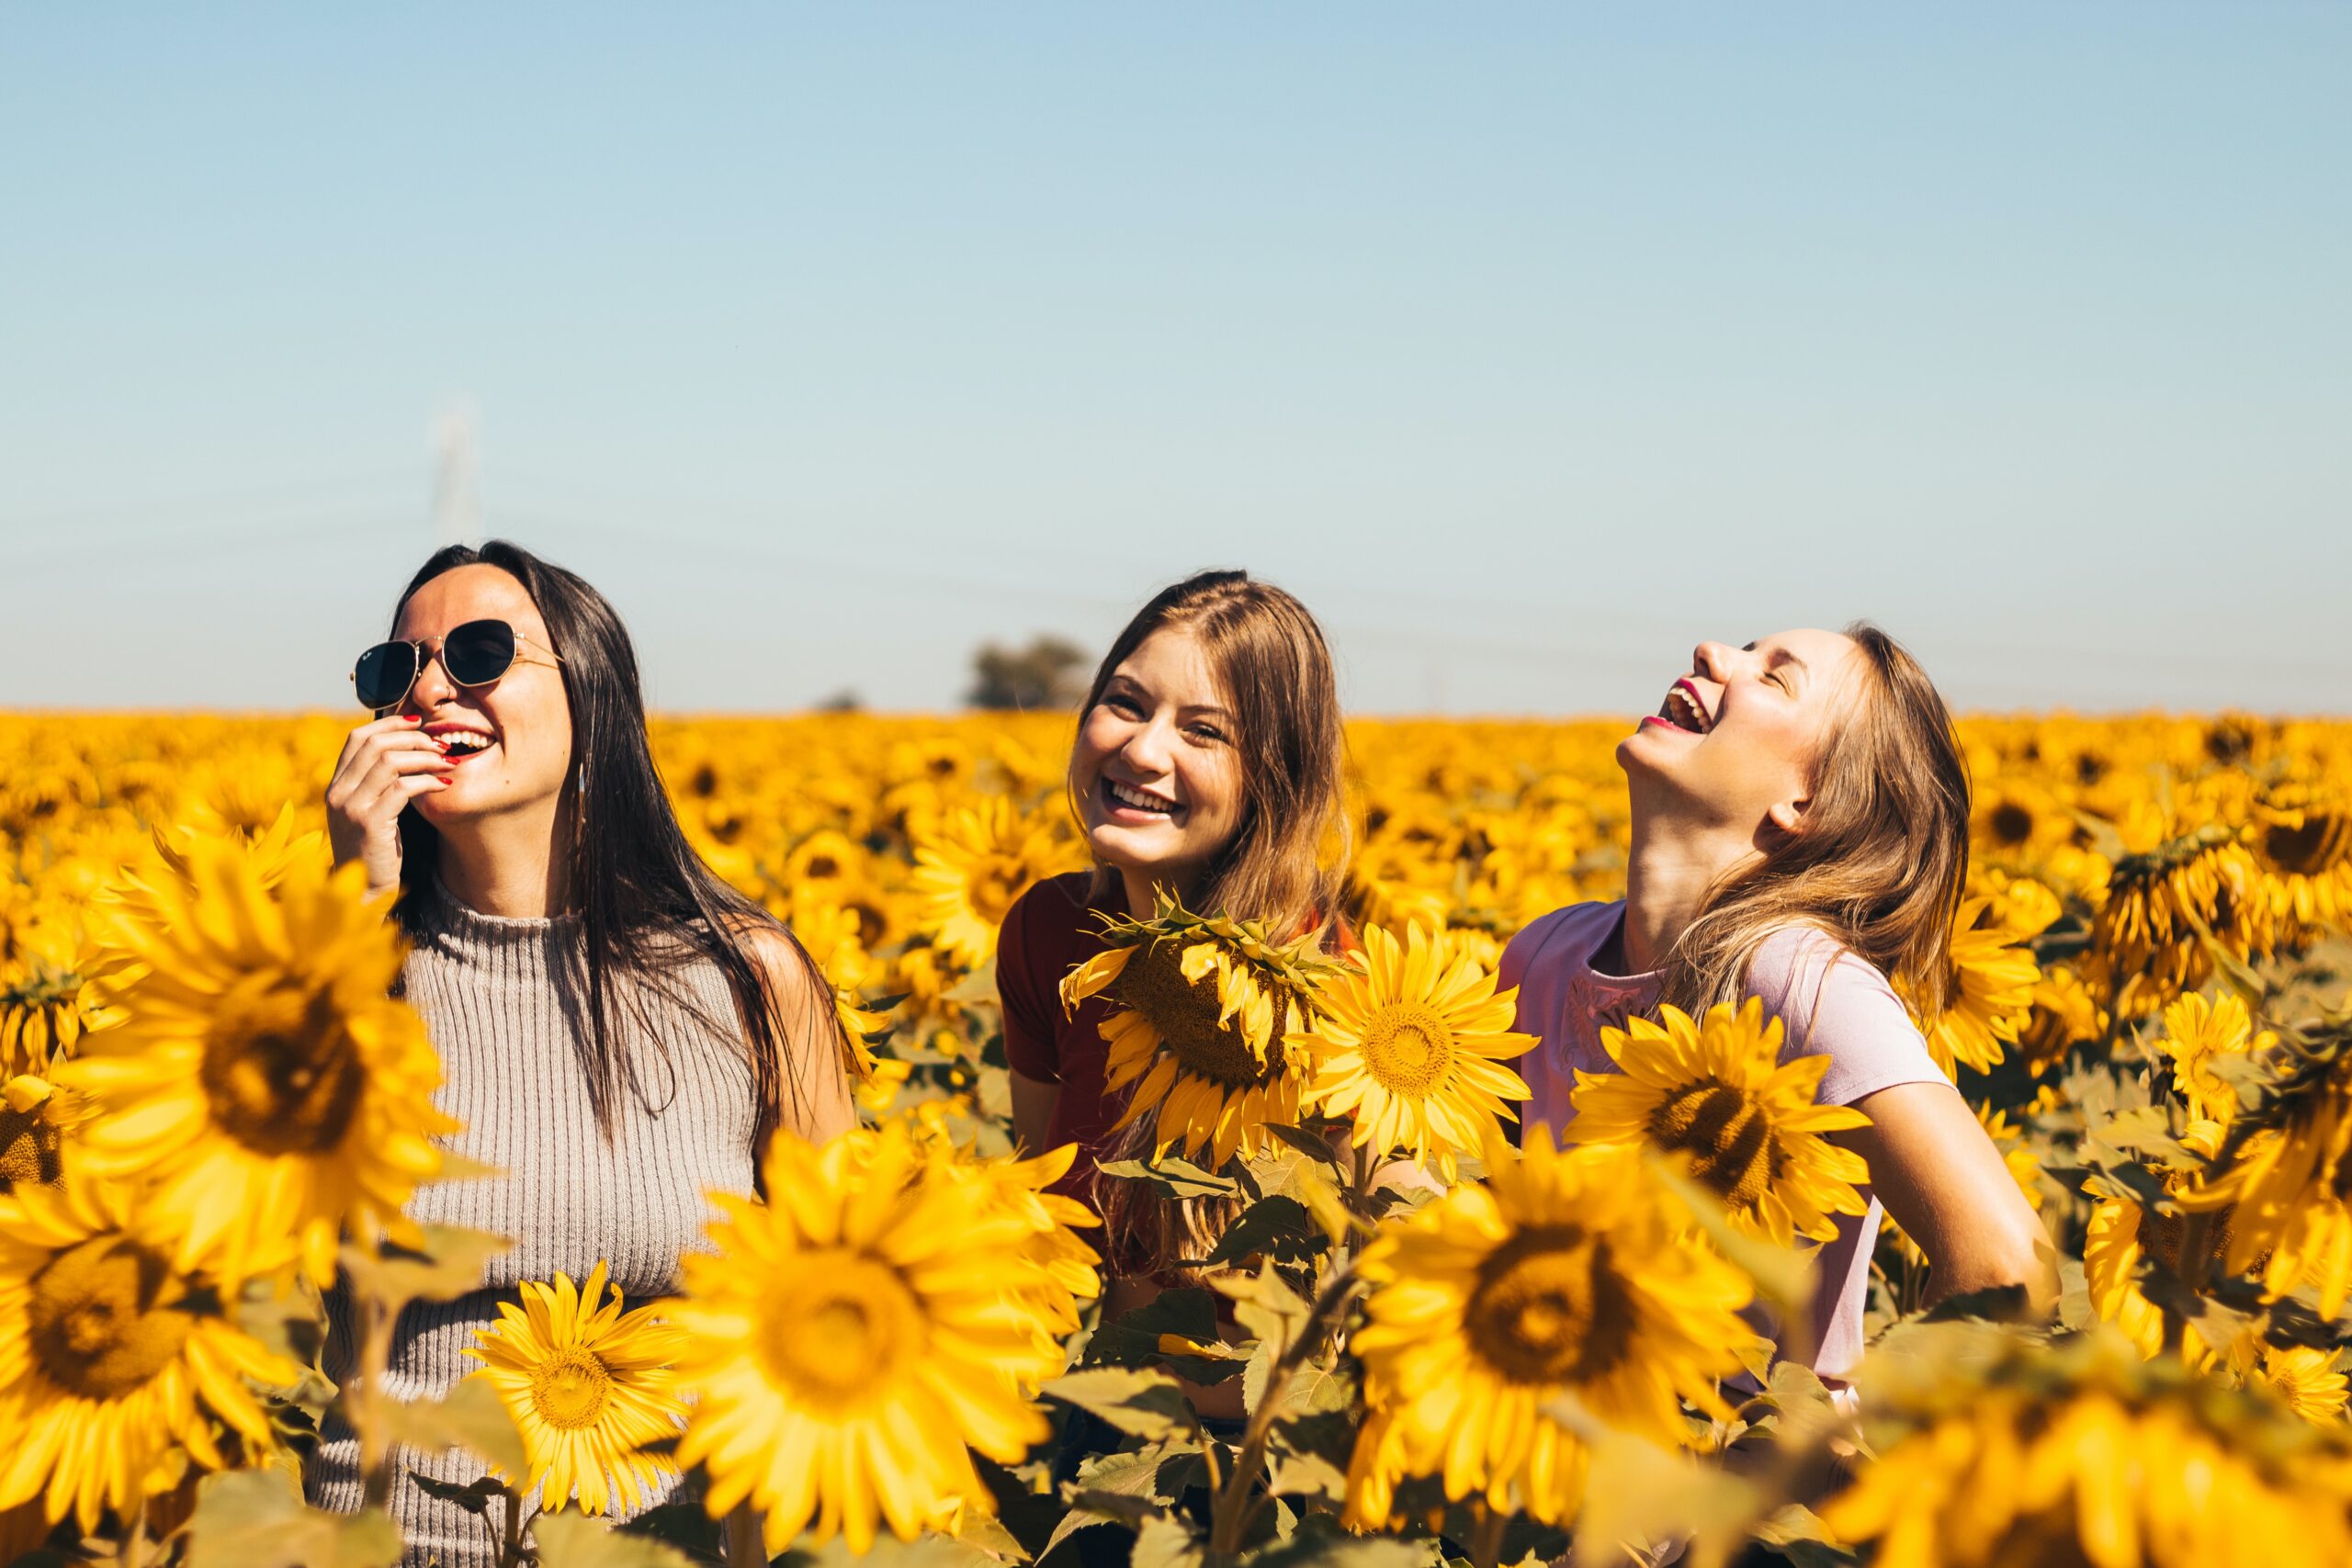 Happy people standing and laughing in a sunflower field